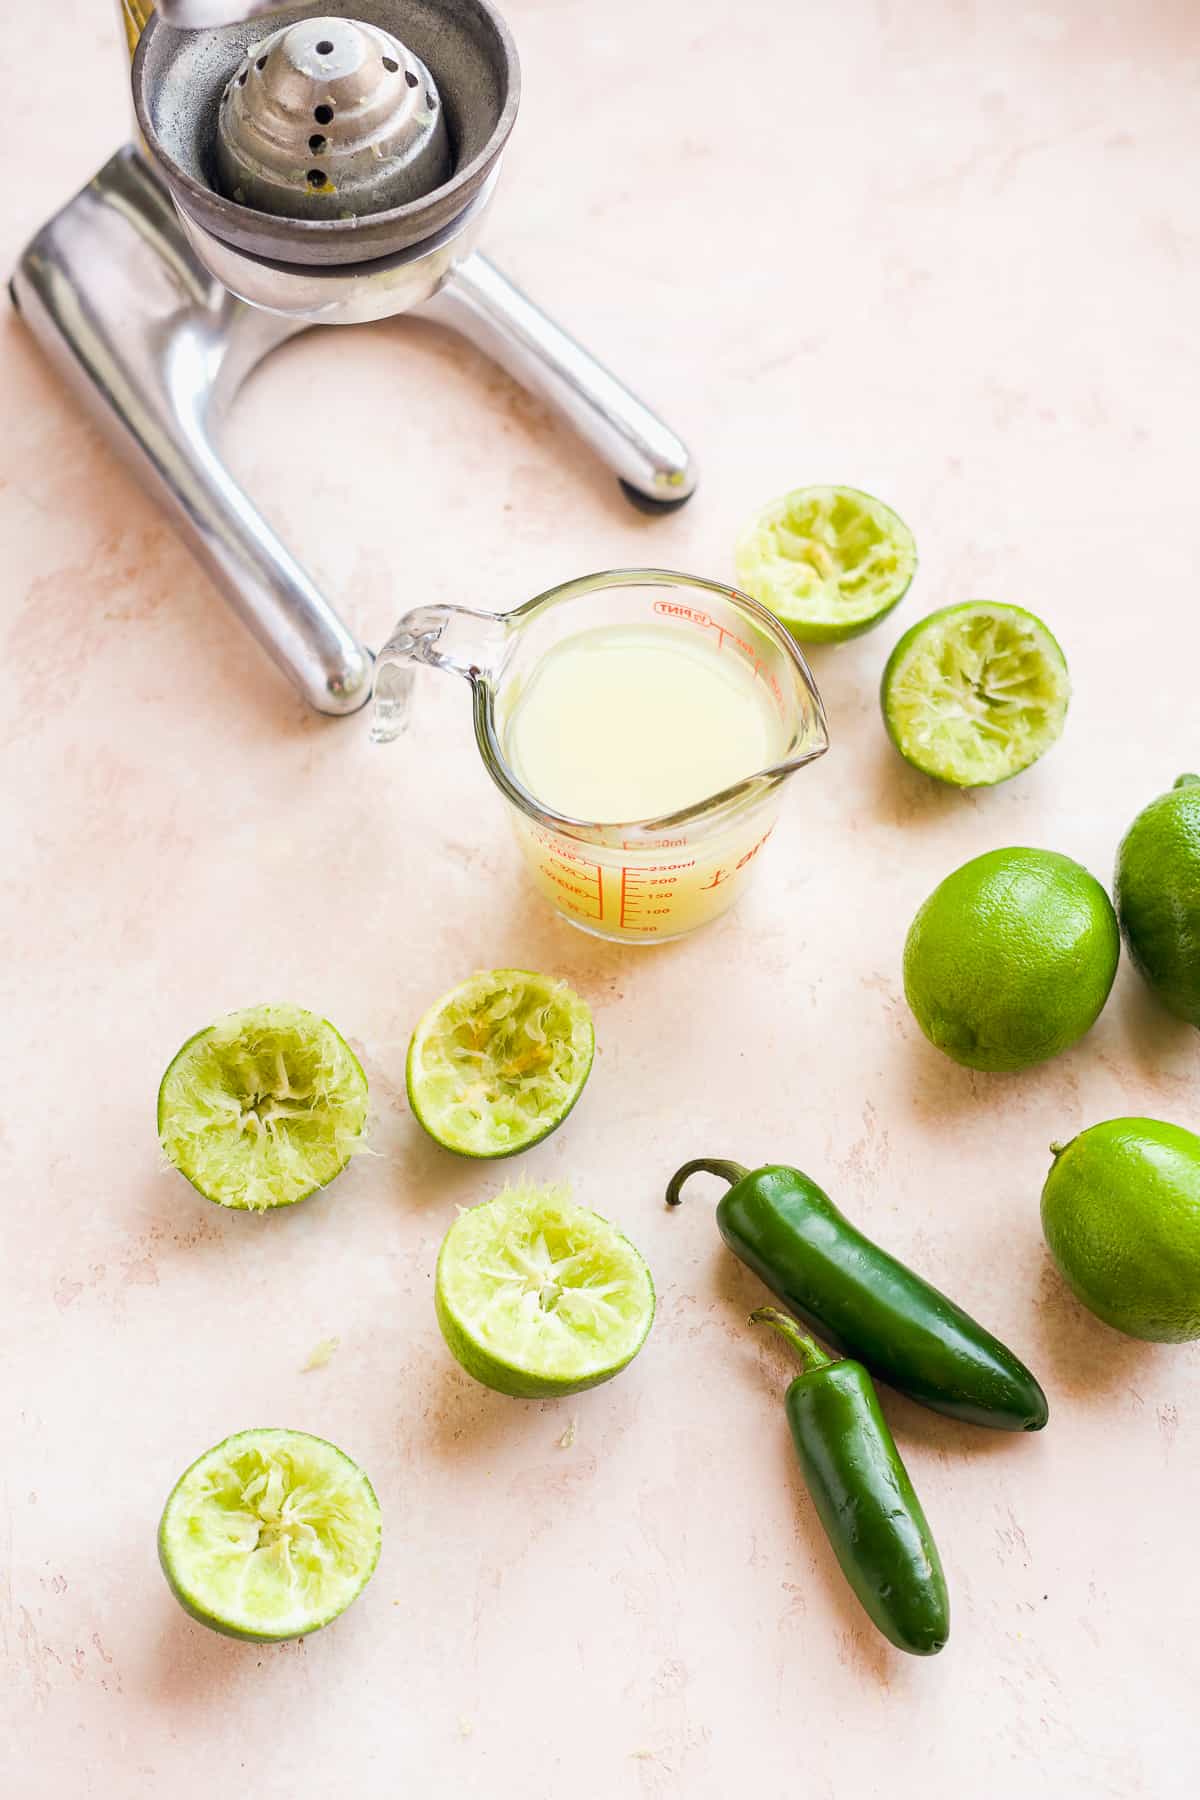 Measuring cup filled with lime juice in front of a metal juicer with limes on the surface.